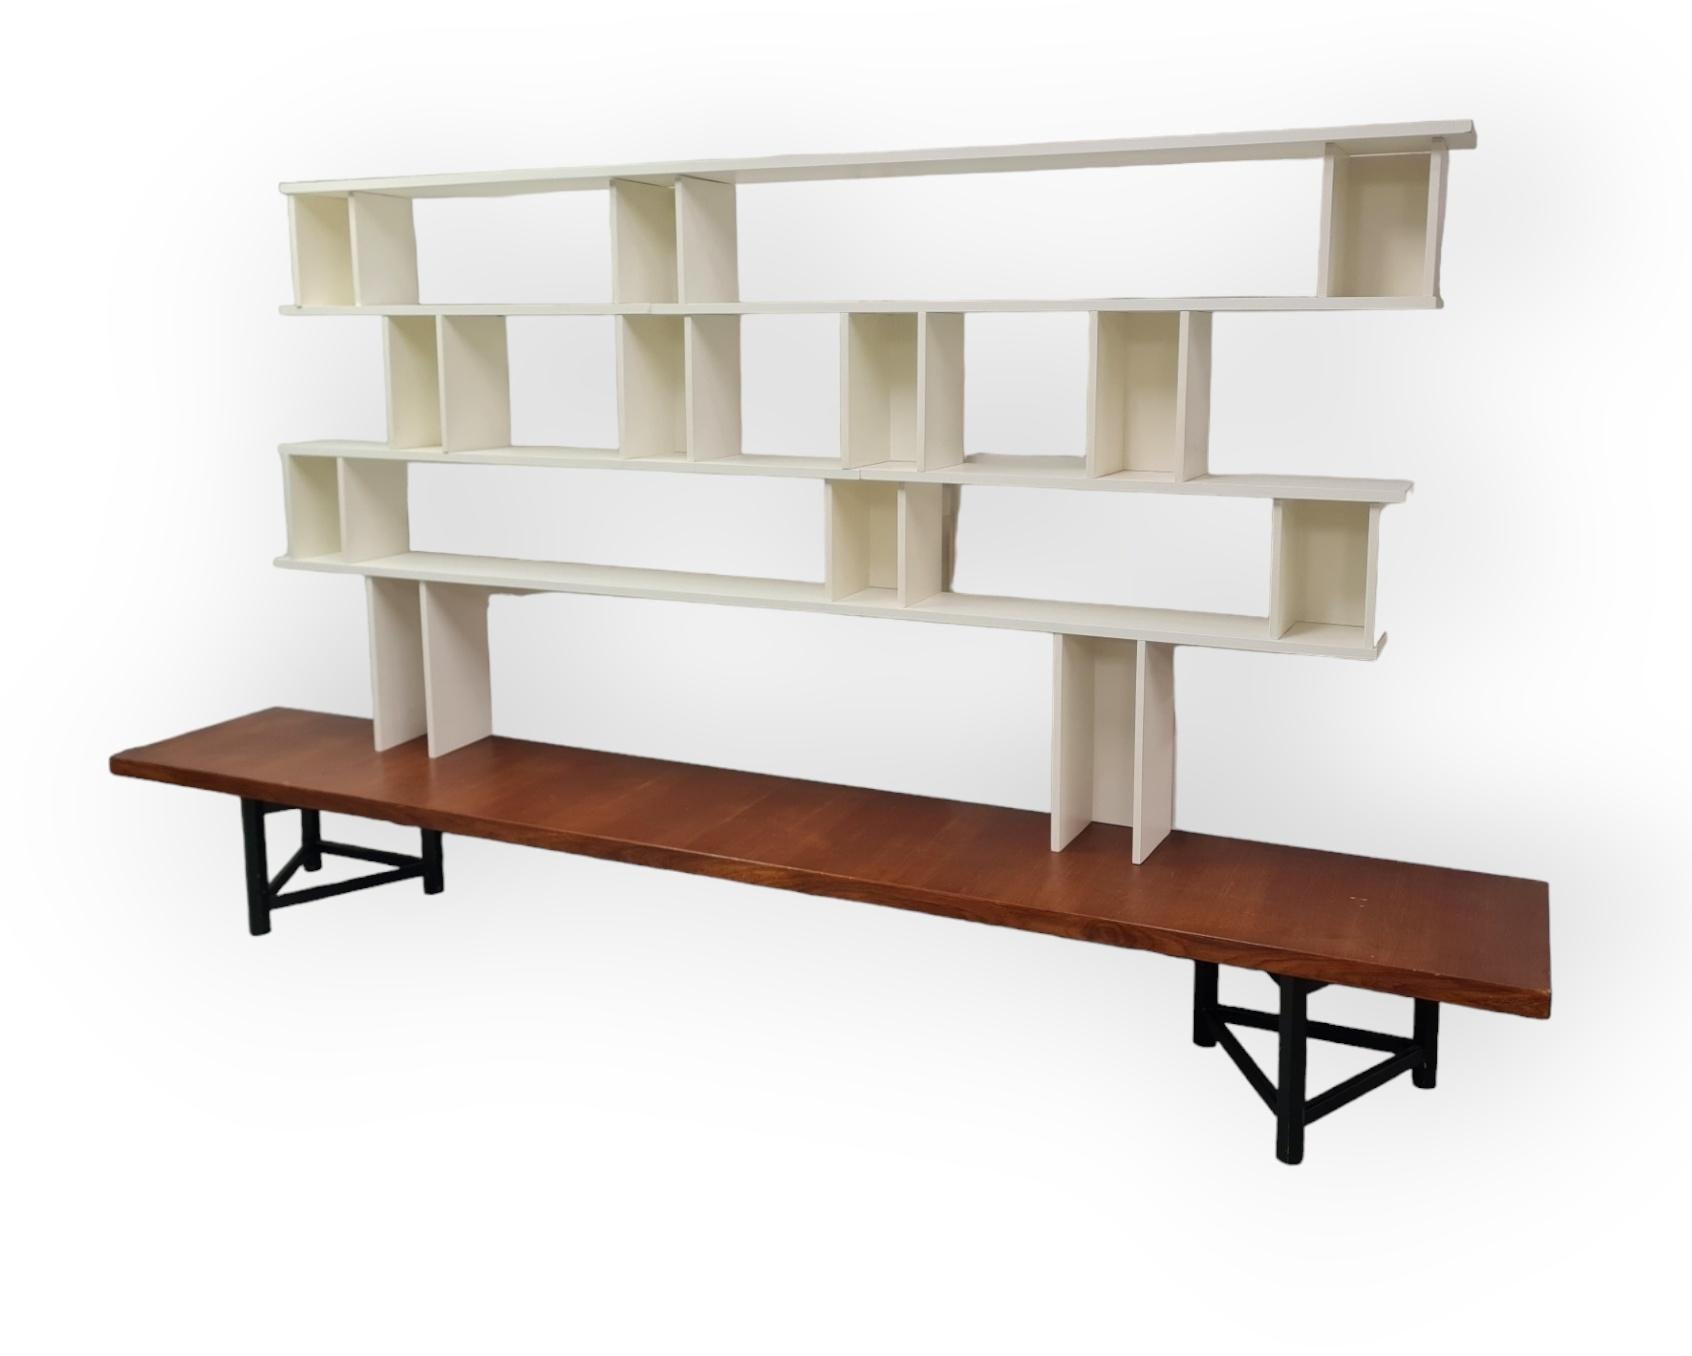 Hiort af Ornäs designed this type shelf in the 1950s. It is called the `Välipala hylly` in Finnish, and it has become a classic a long time ago. Actually, it has been taken again into production just recently. 

This is a very simple, practical and